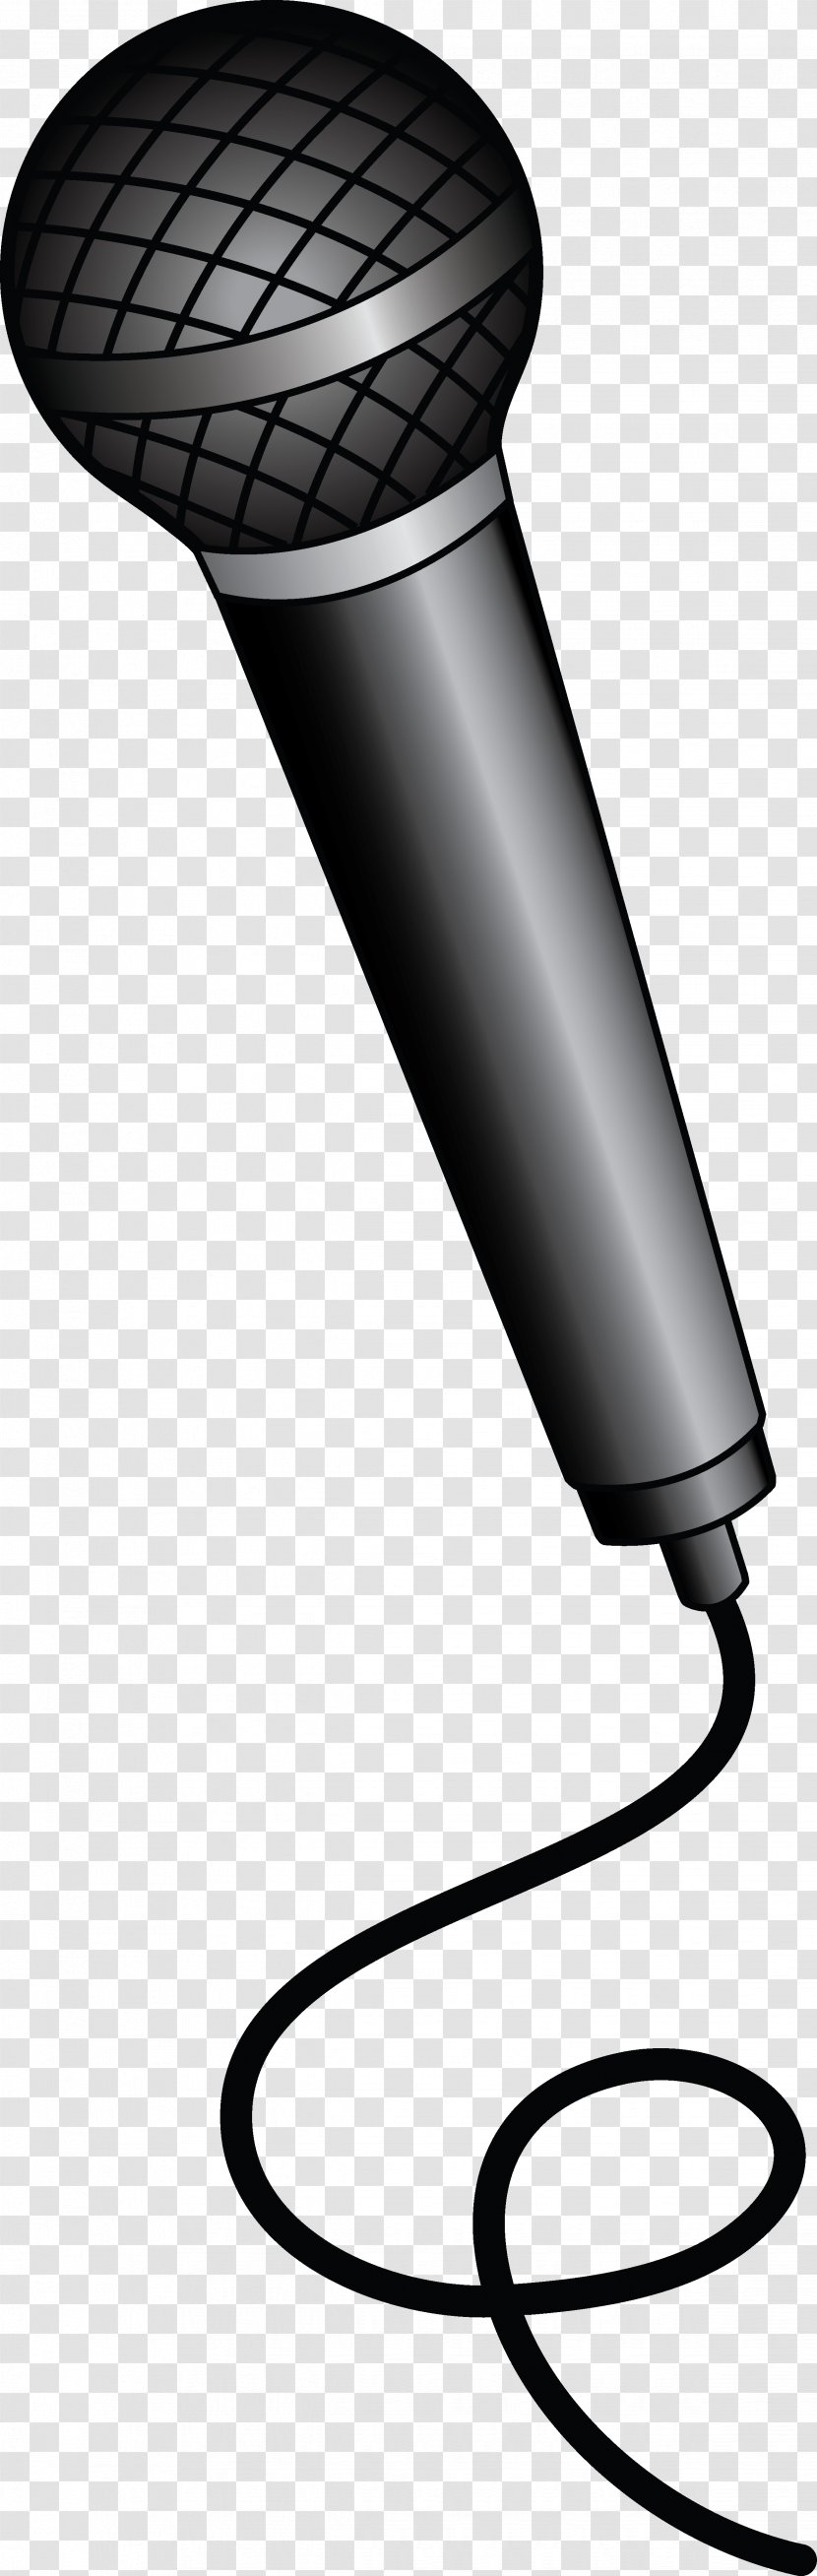 Microphone Clip Art - Wireless - Mike Cliparts Transparent PNG